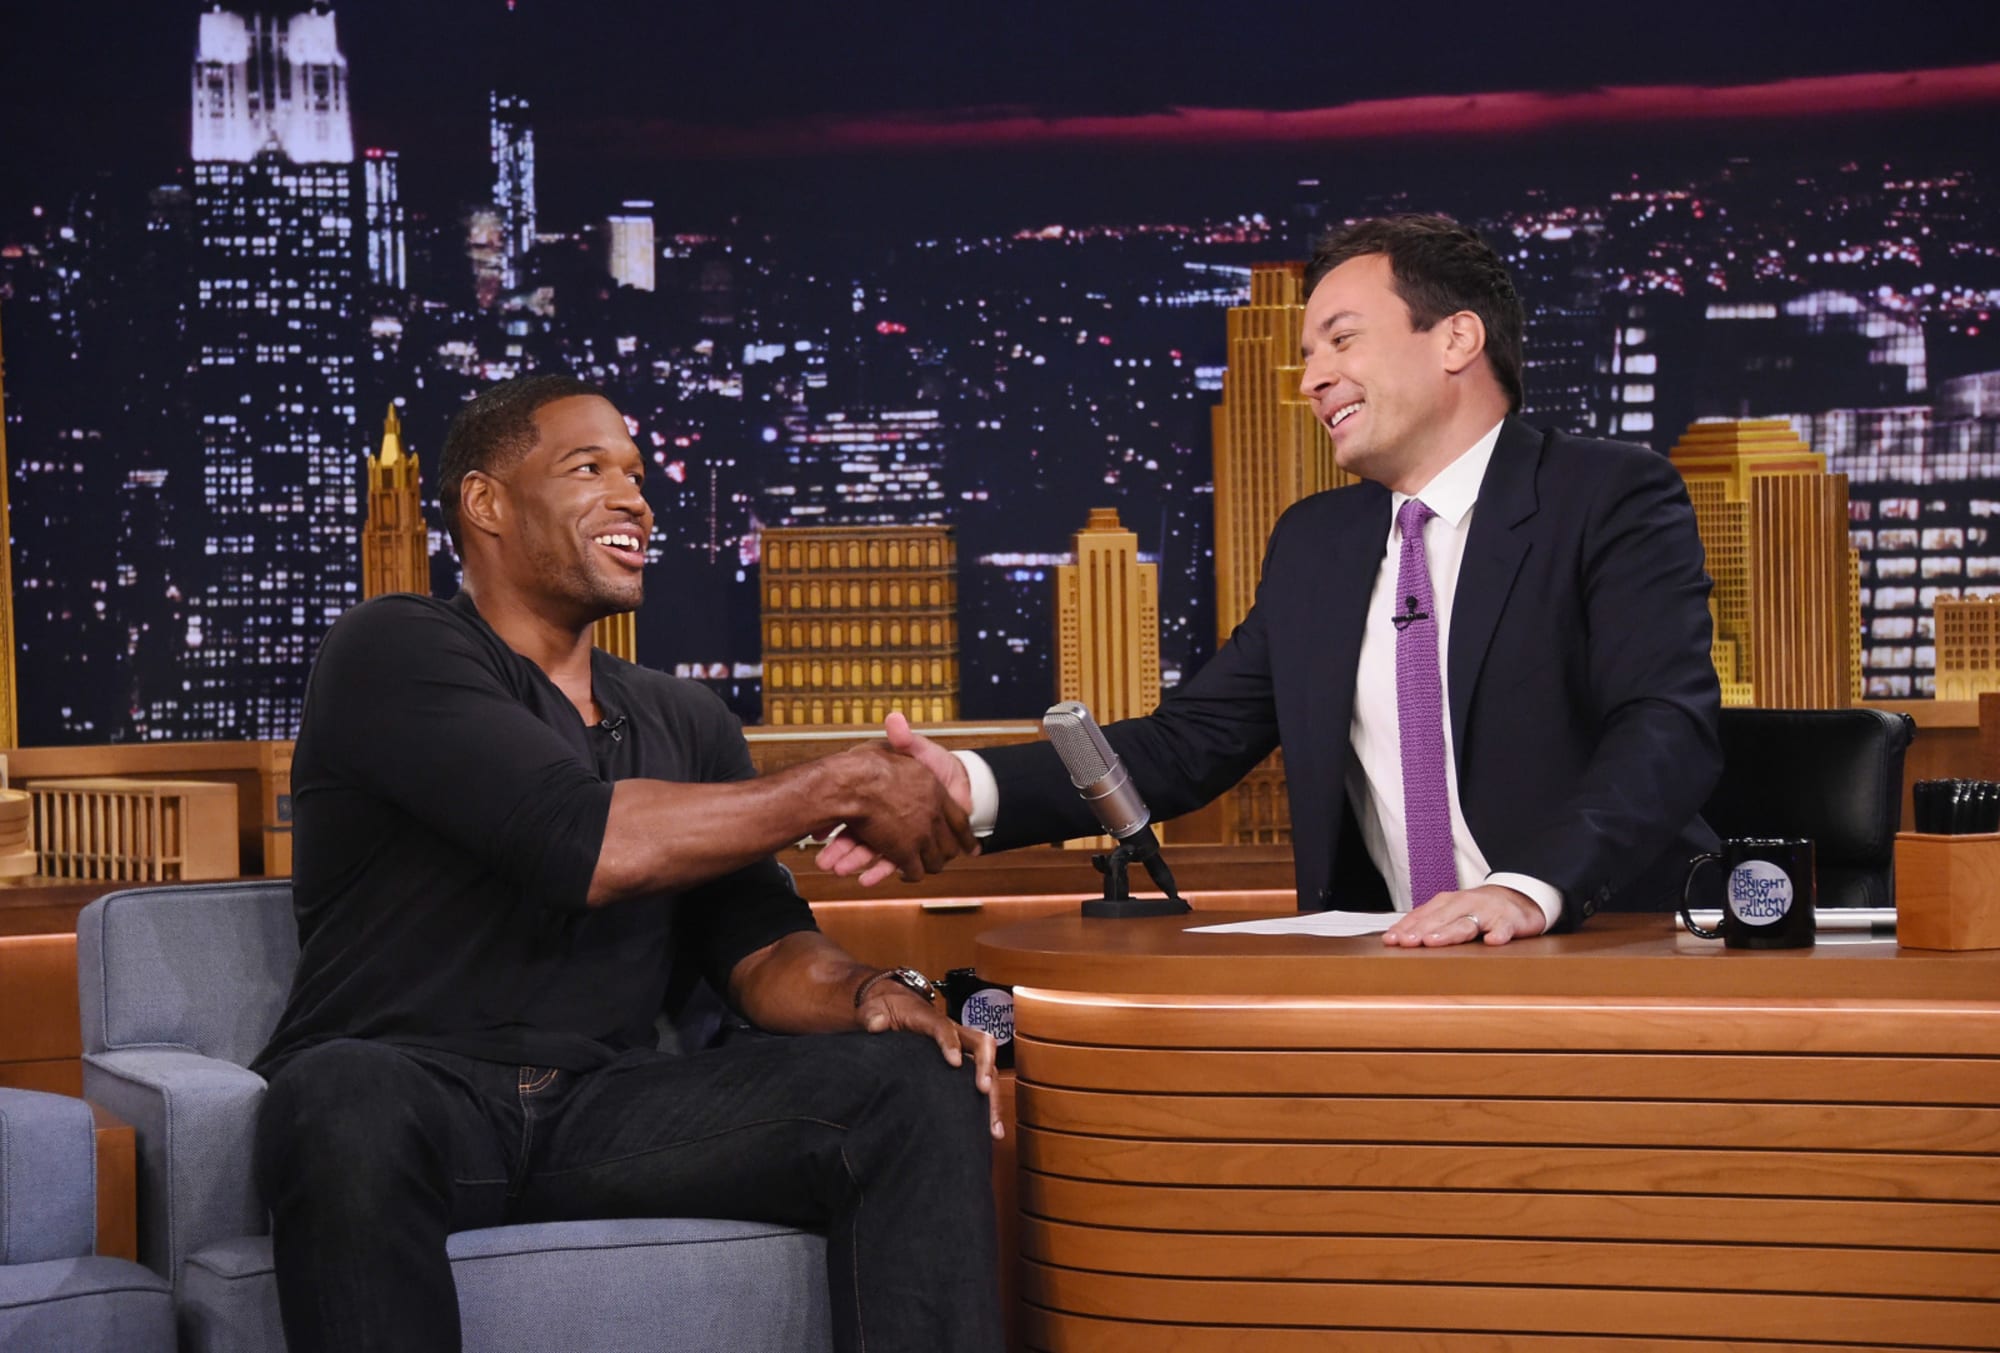 The Tonight Show Starring Jimmy Fallon: The best NFL bits and interviews